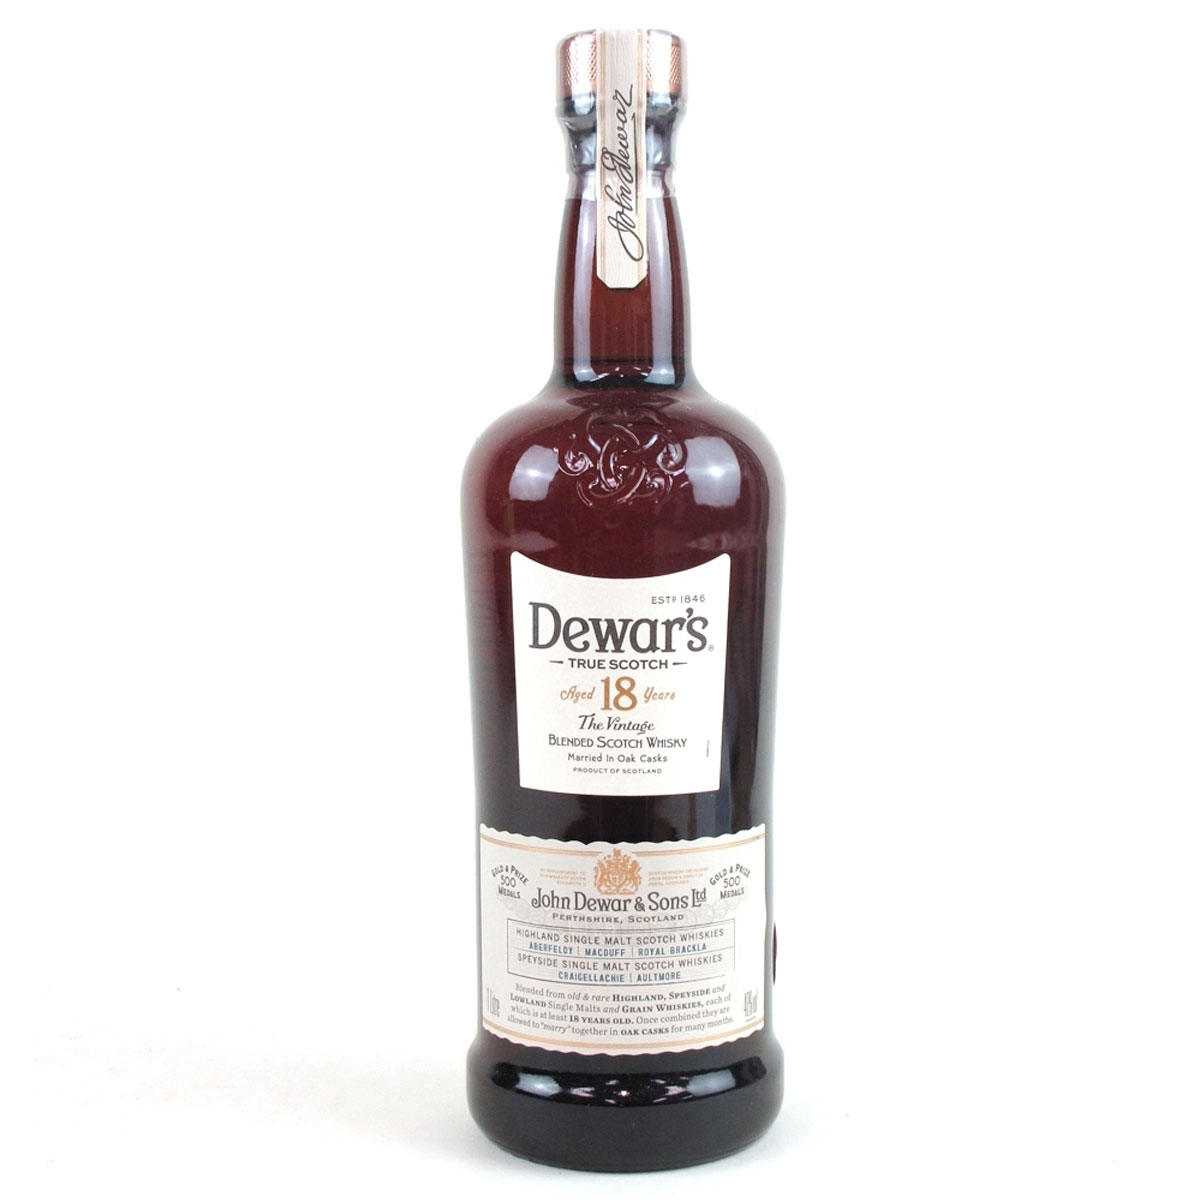 a bottle of dewars whisky 18 years old